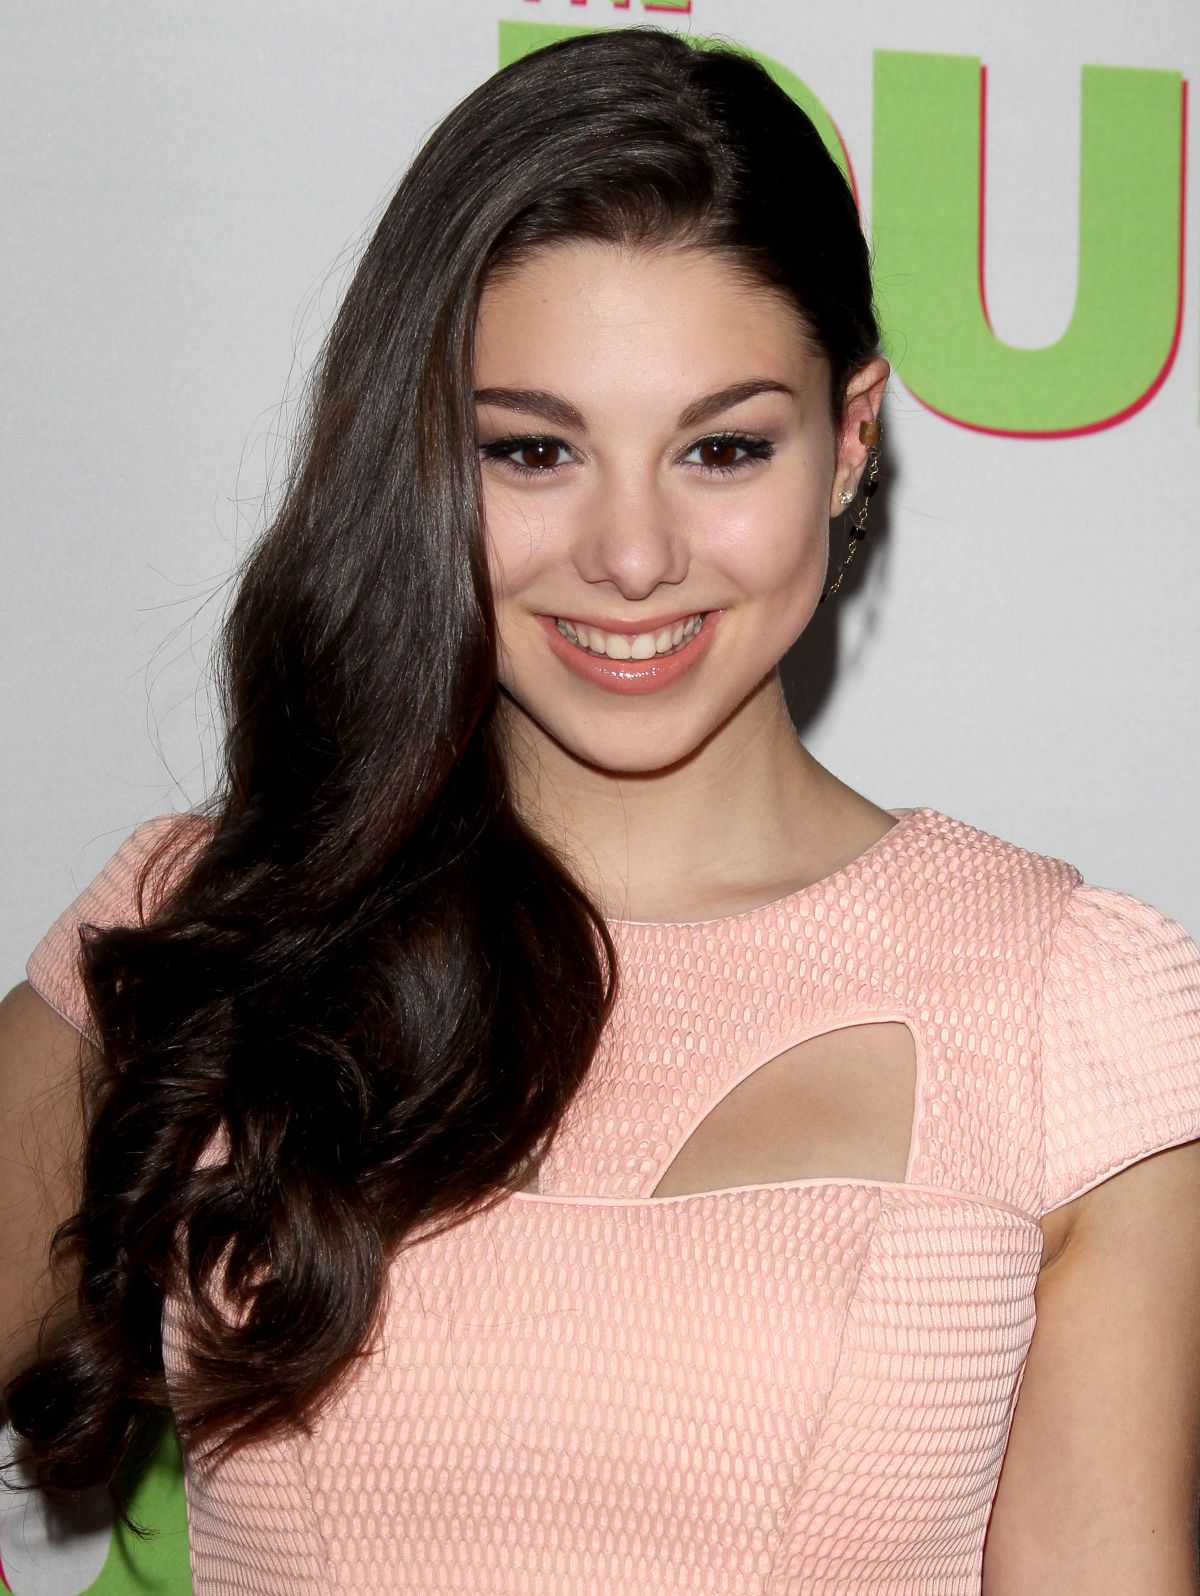 KIRA KOSARIN at The Duff Premiere in Hollywood – HawtCelebs